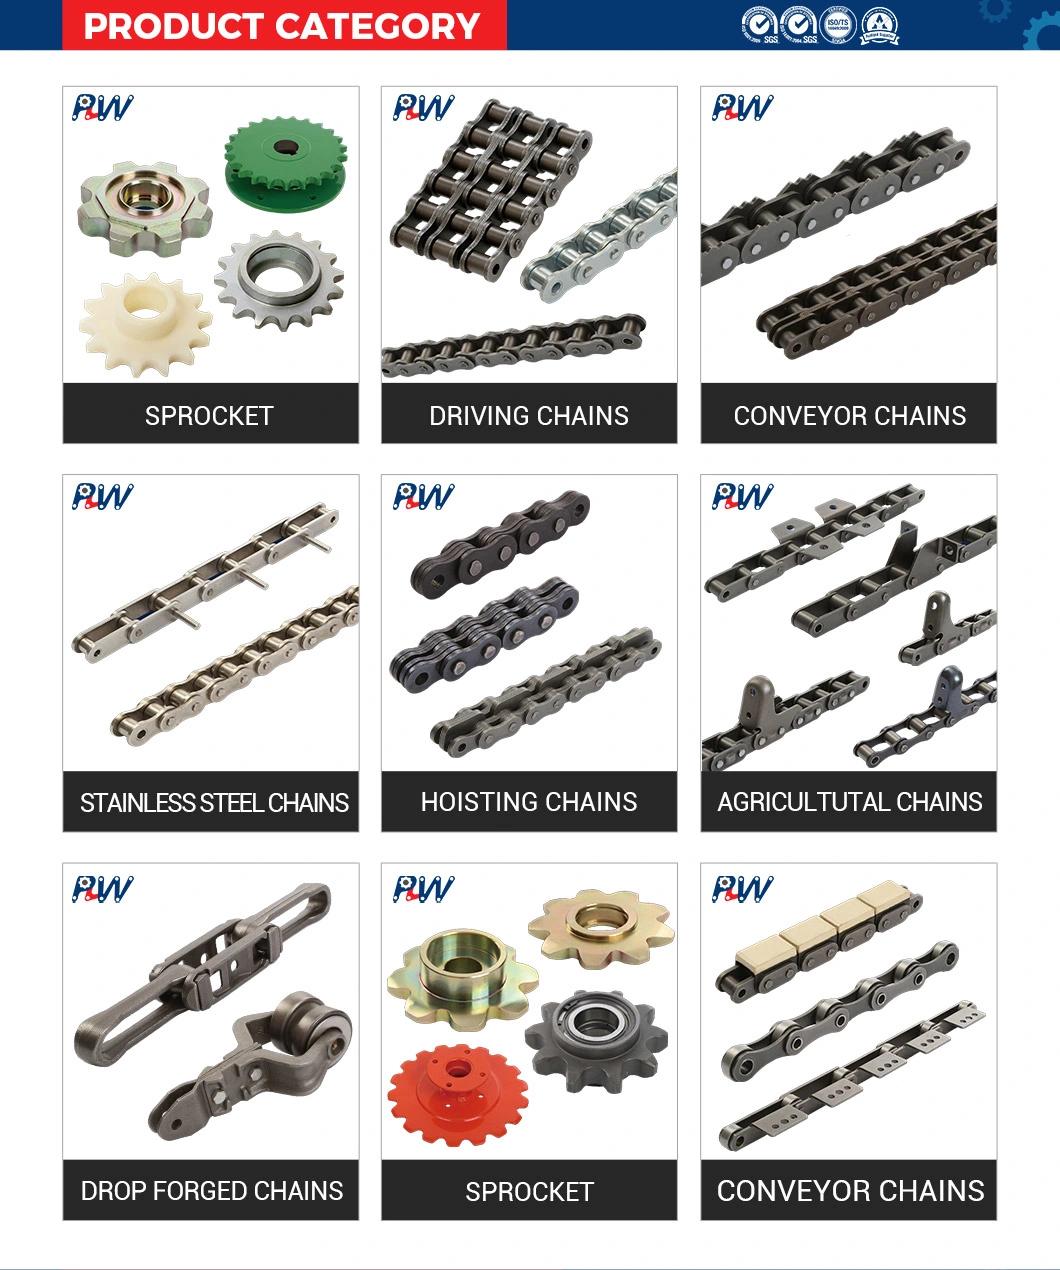 Free Sample C Type Agricultural Chain with Attachments